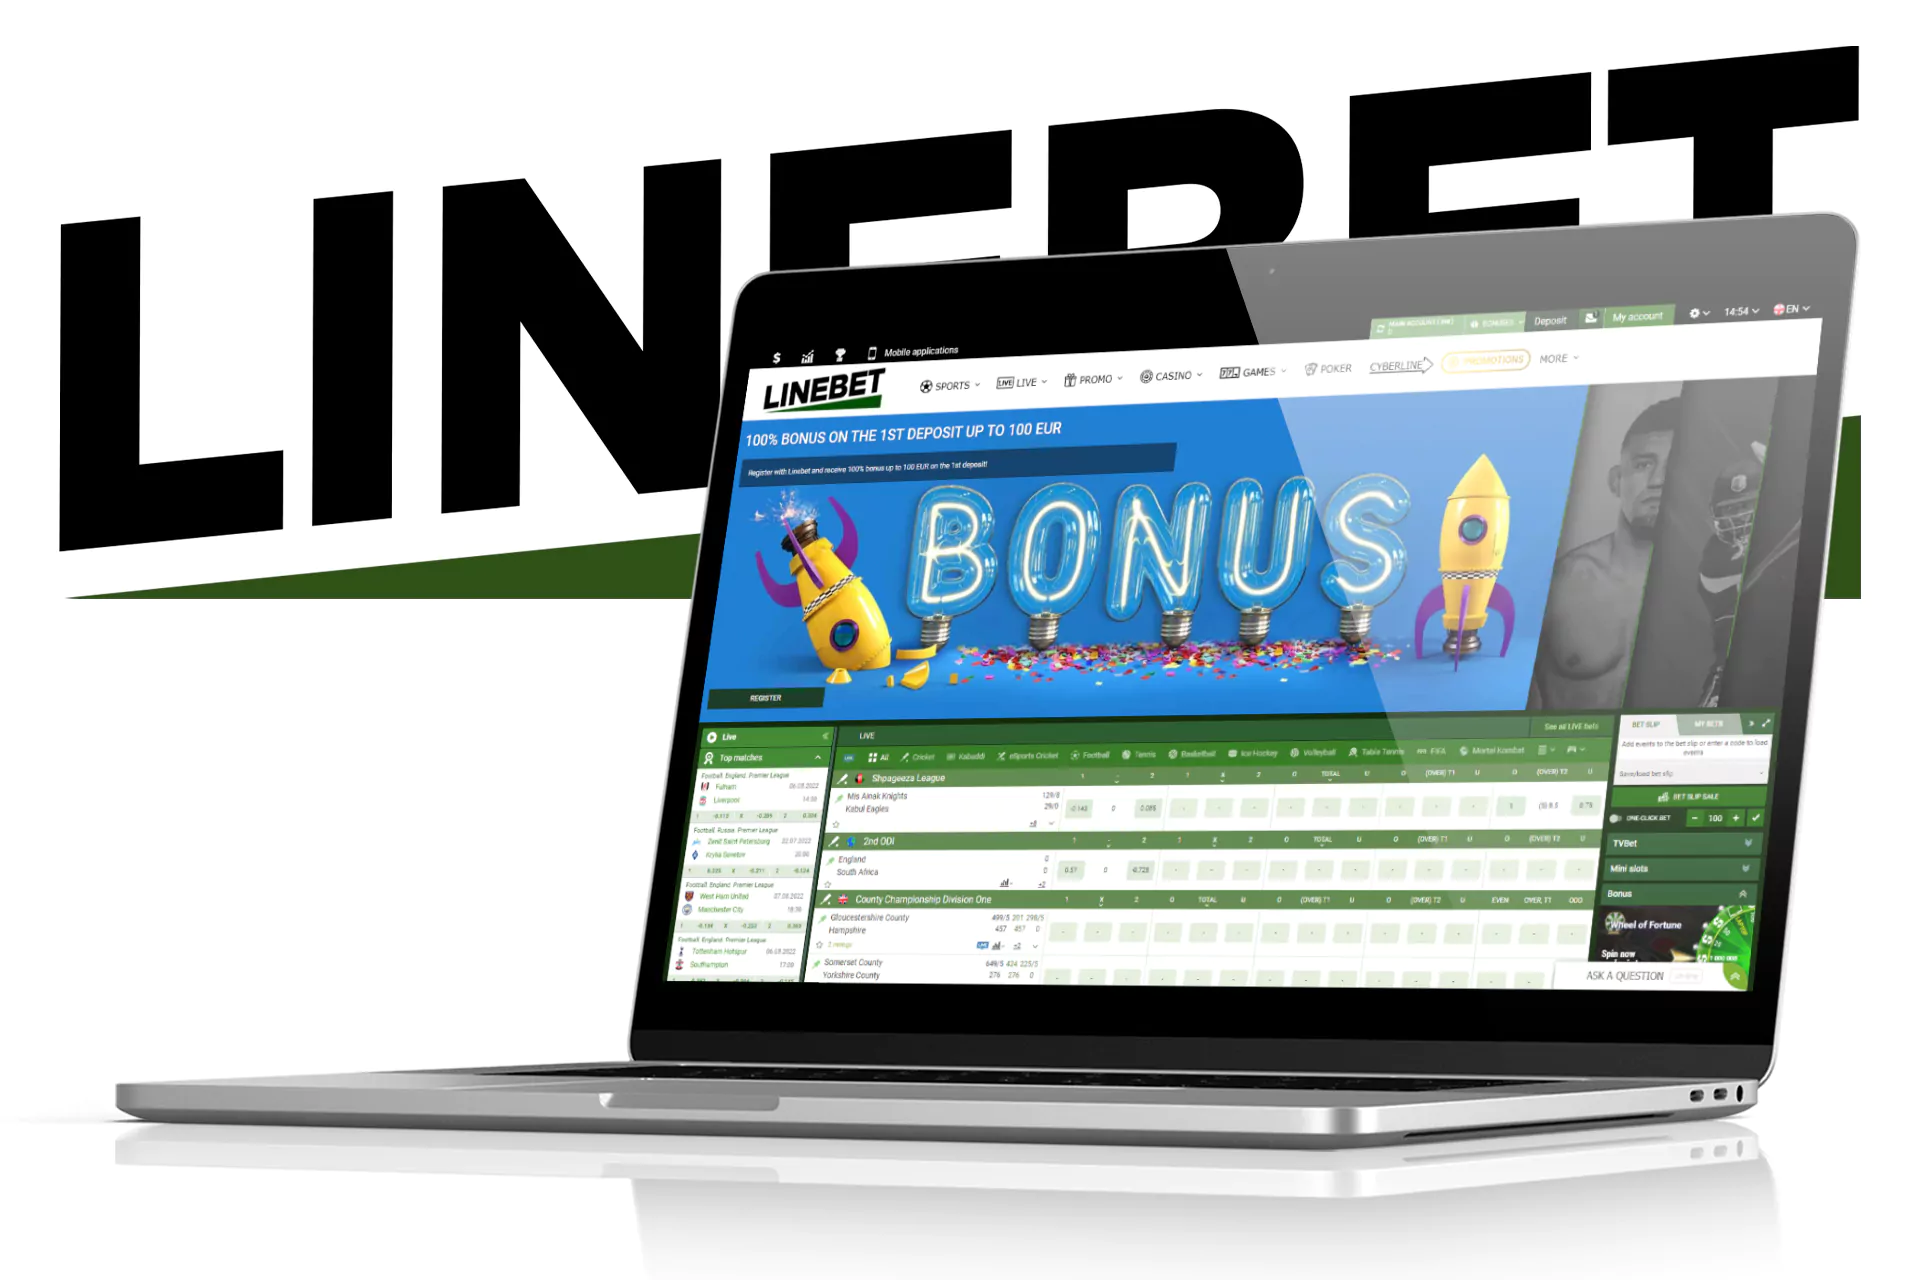 In totalizator, users find unique betting choices provided by Linebet.